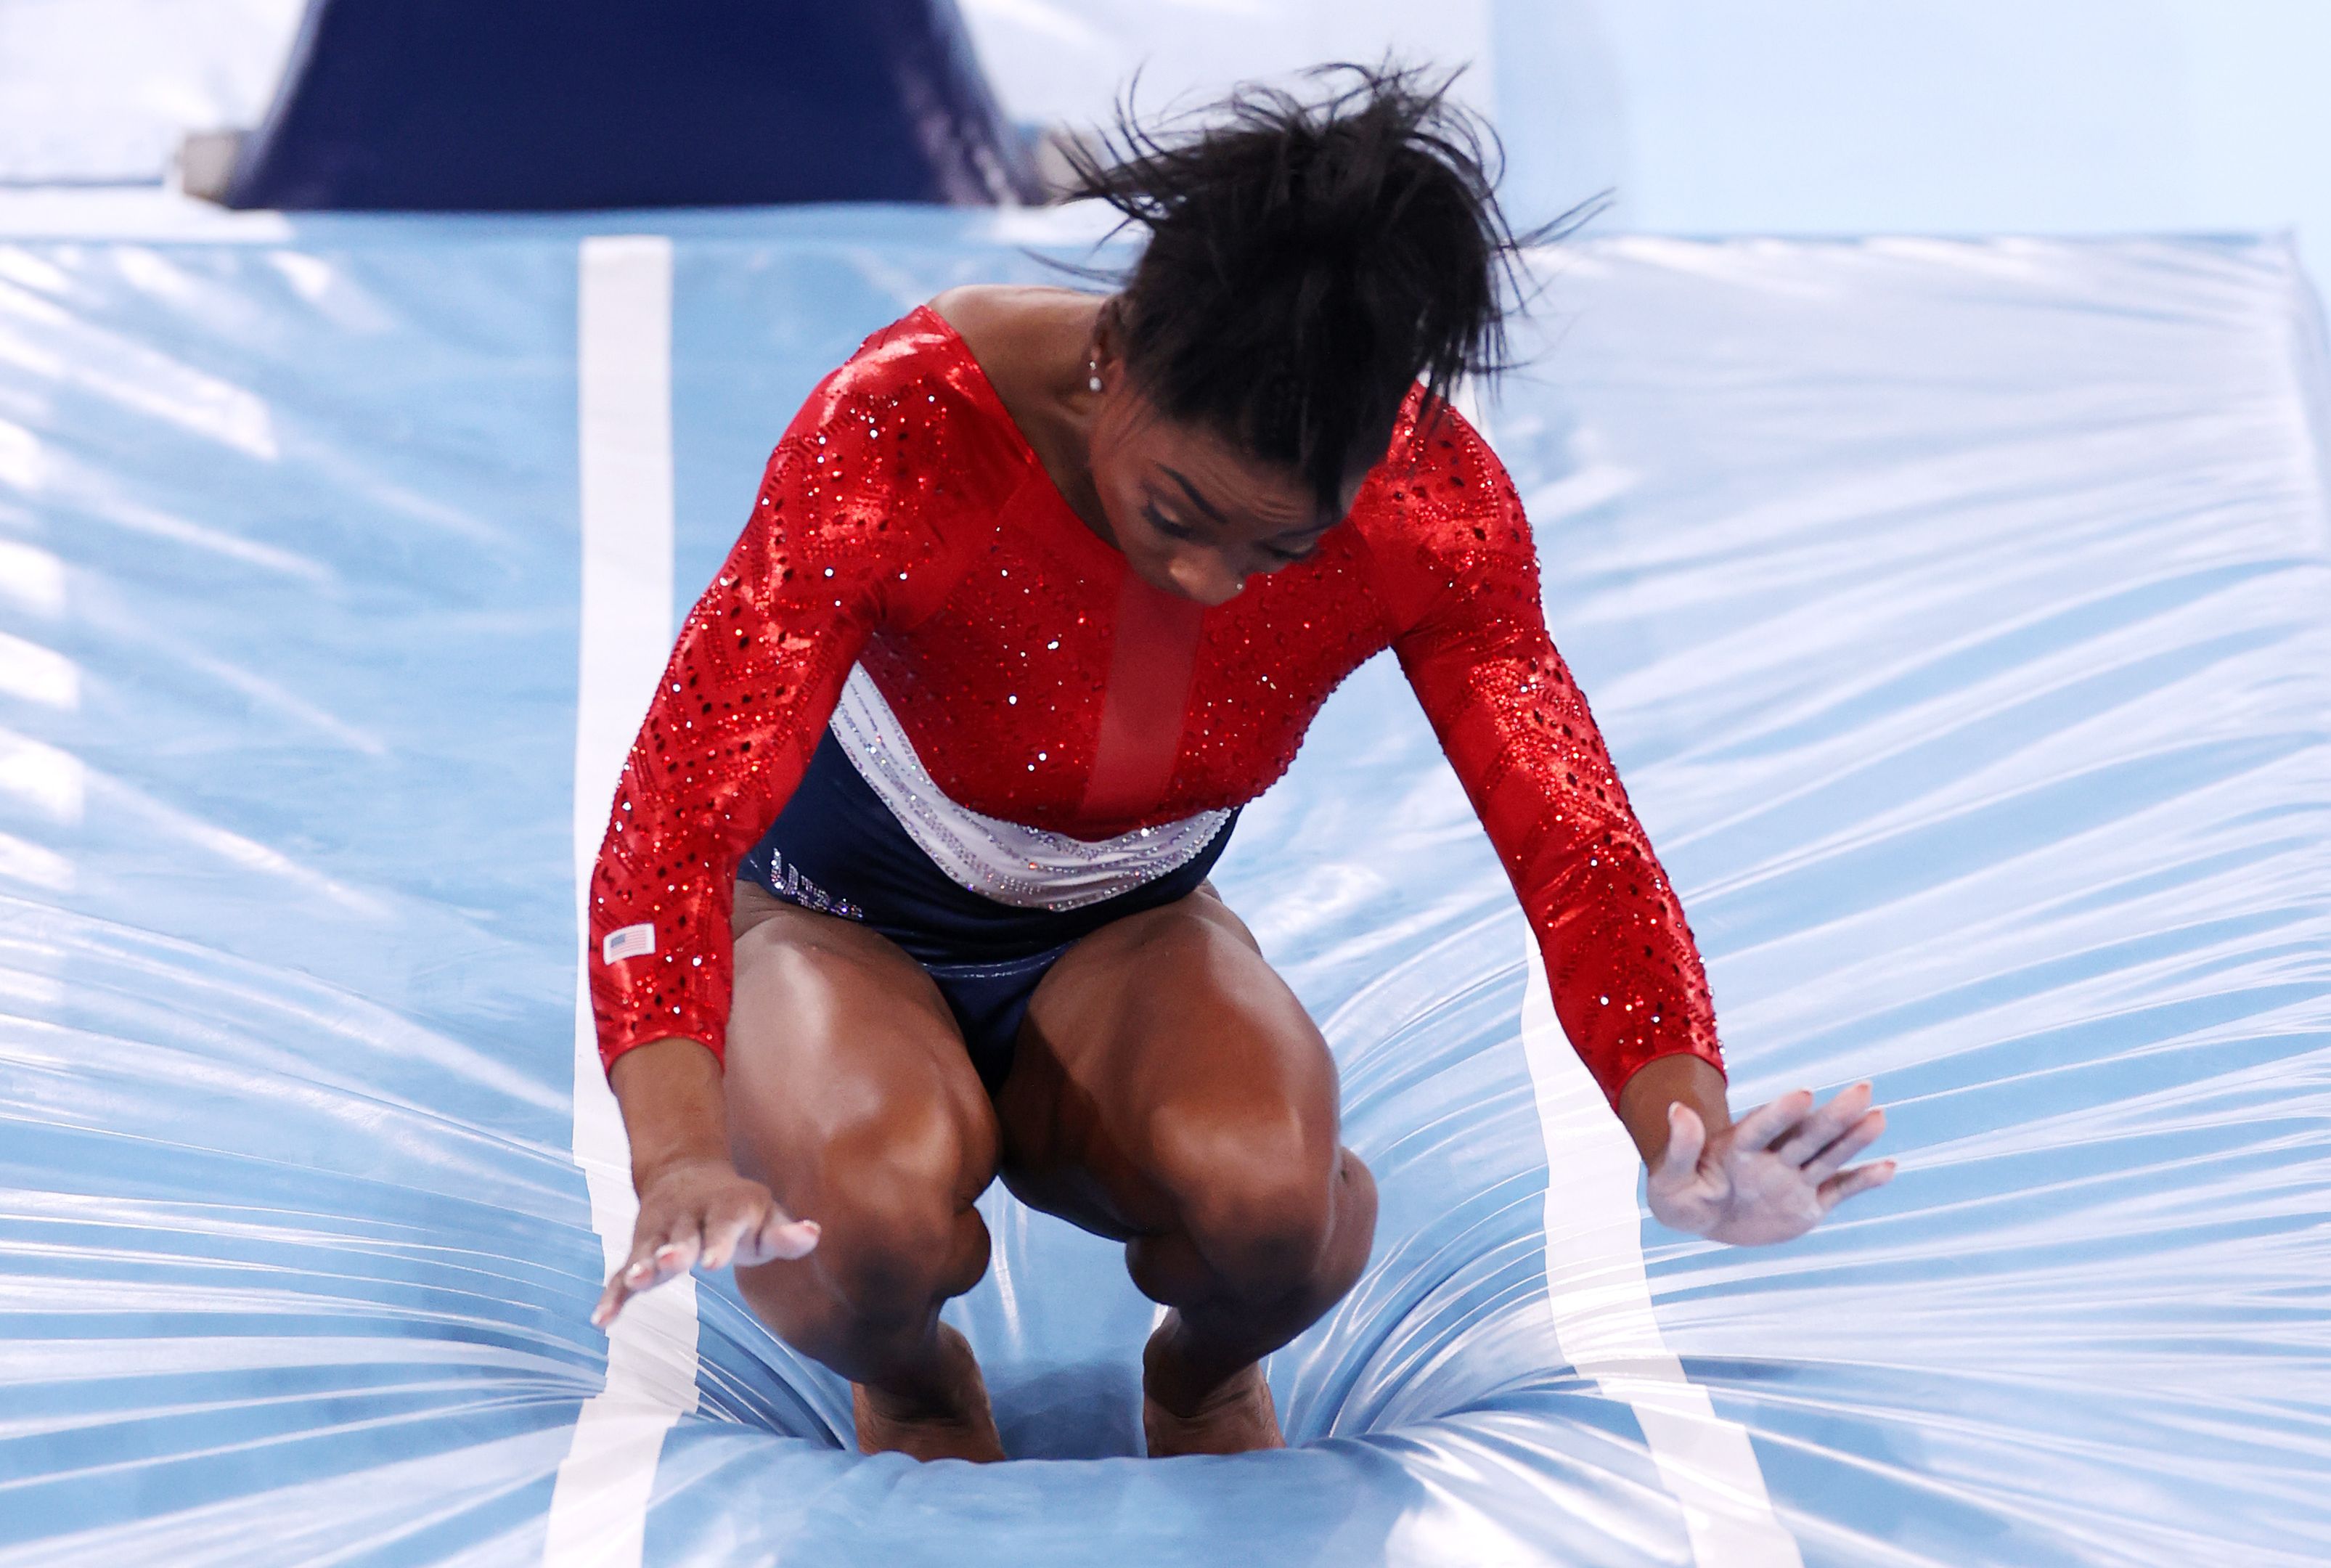 Olympic champion Simone Biles out of team gymnastics final in mysterious circumstances